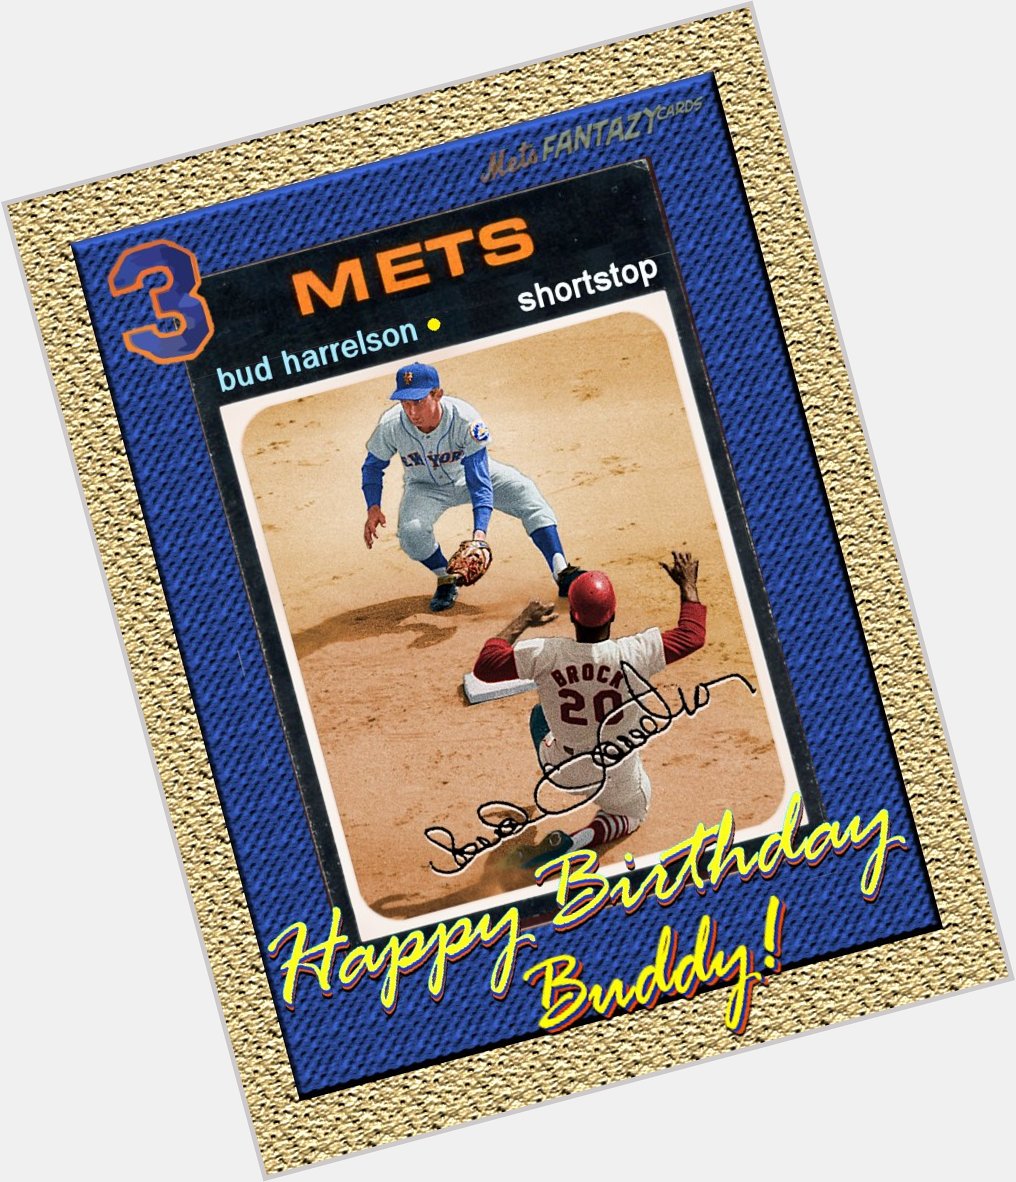 HAPPY BIRTHDAY BUD HARRELSON! One of my favorite all-time Mets.   